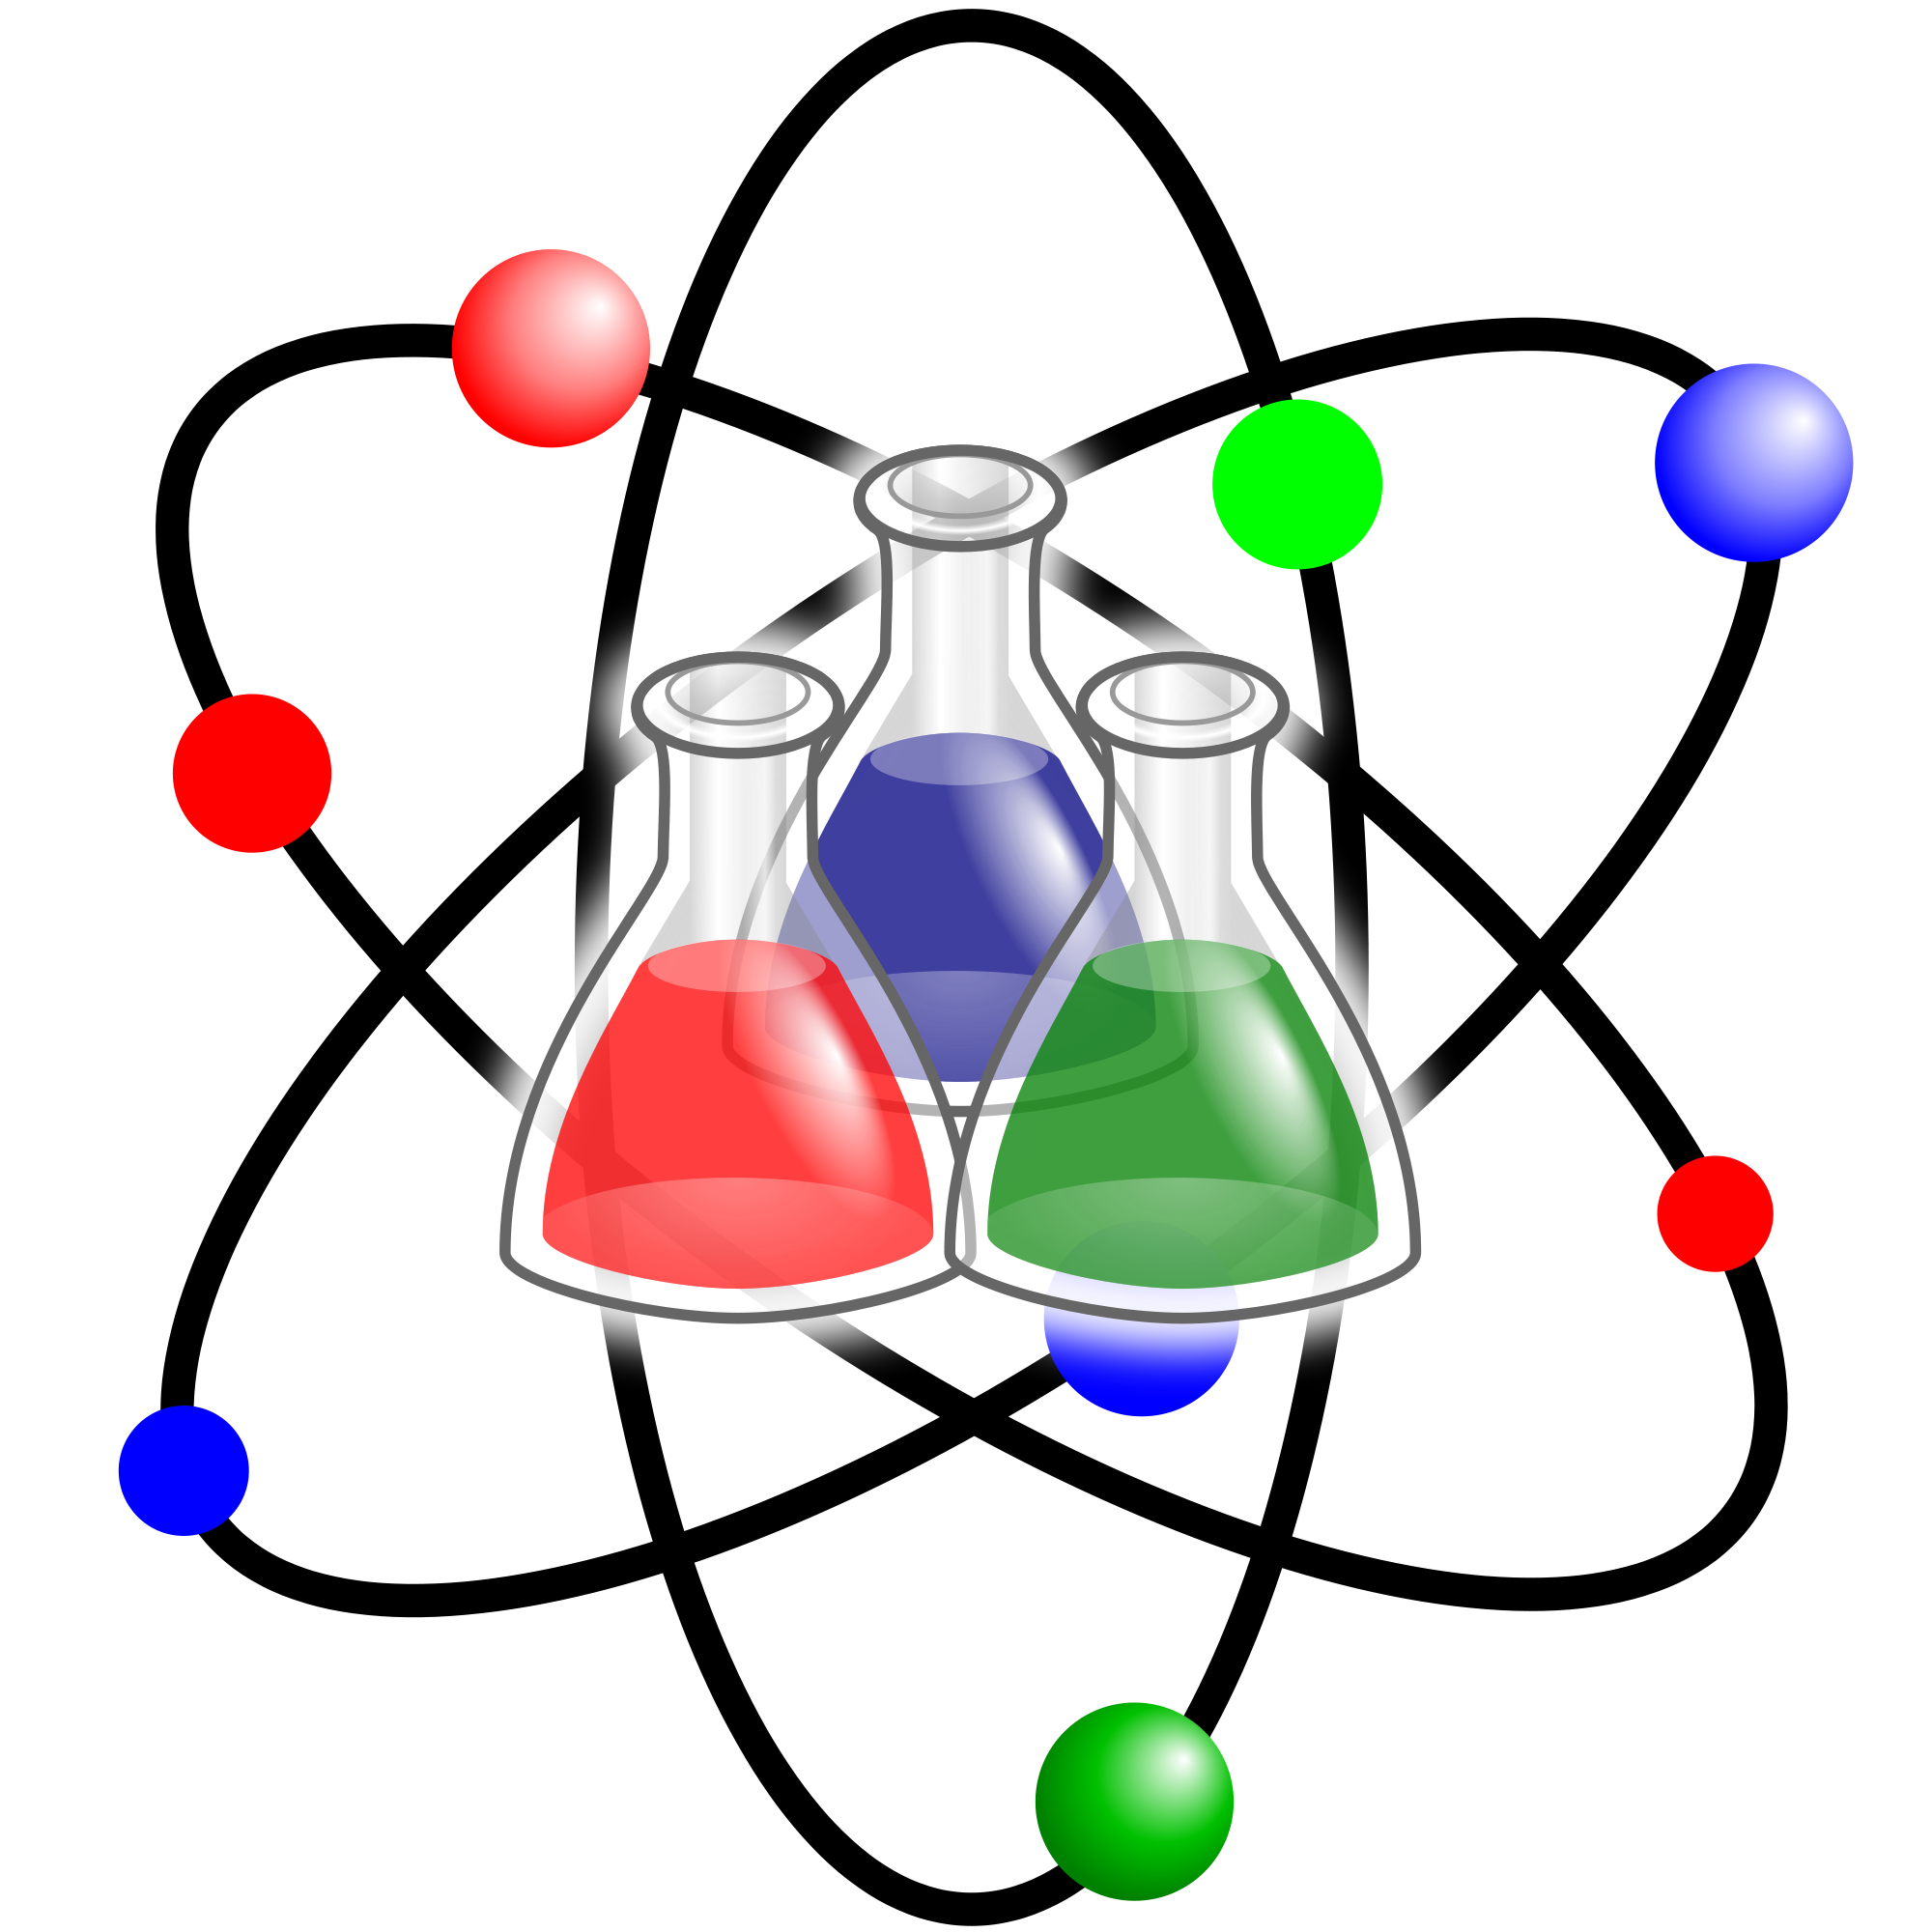 File:Science-symbol-2.svg - Wikimedia Commons